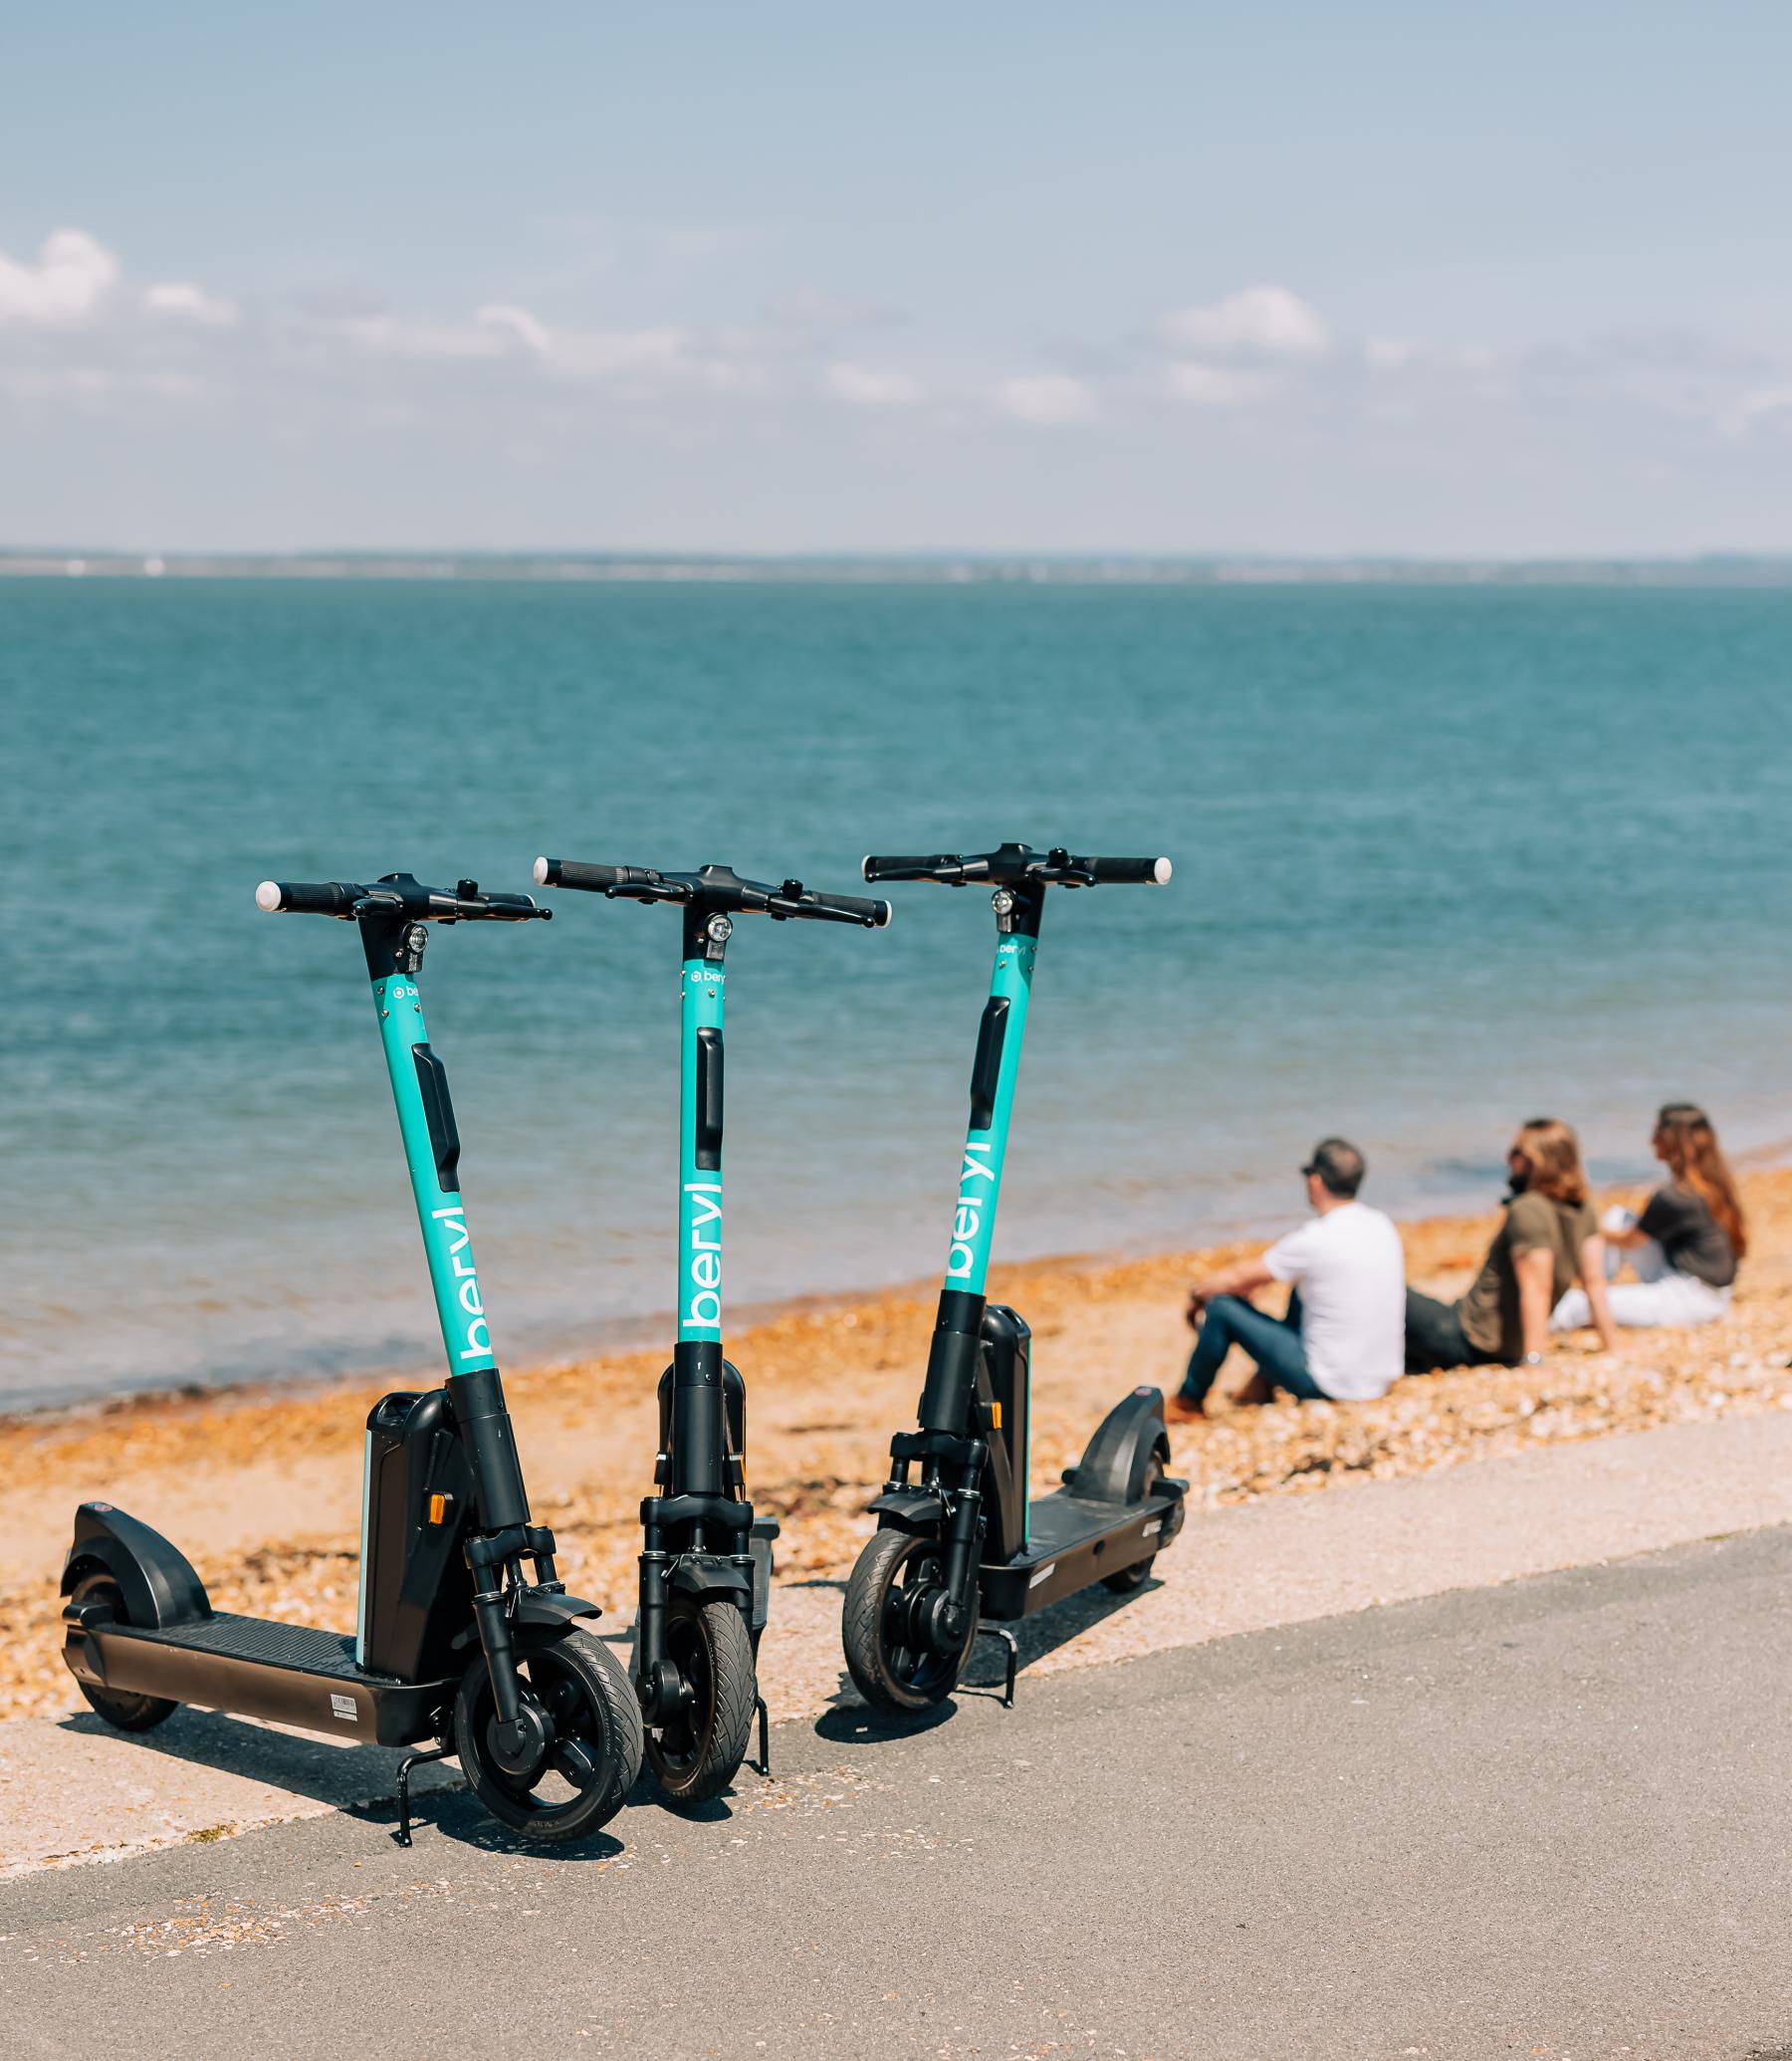 Beryl scooters on Isle of Wight beach